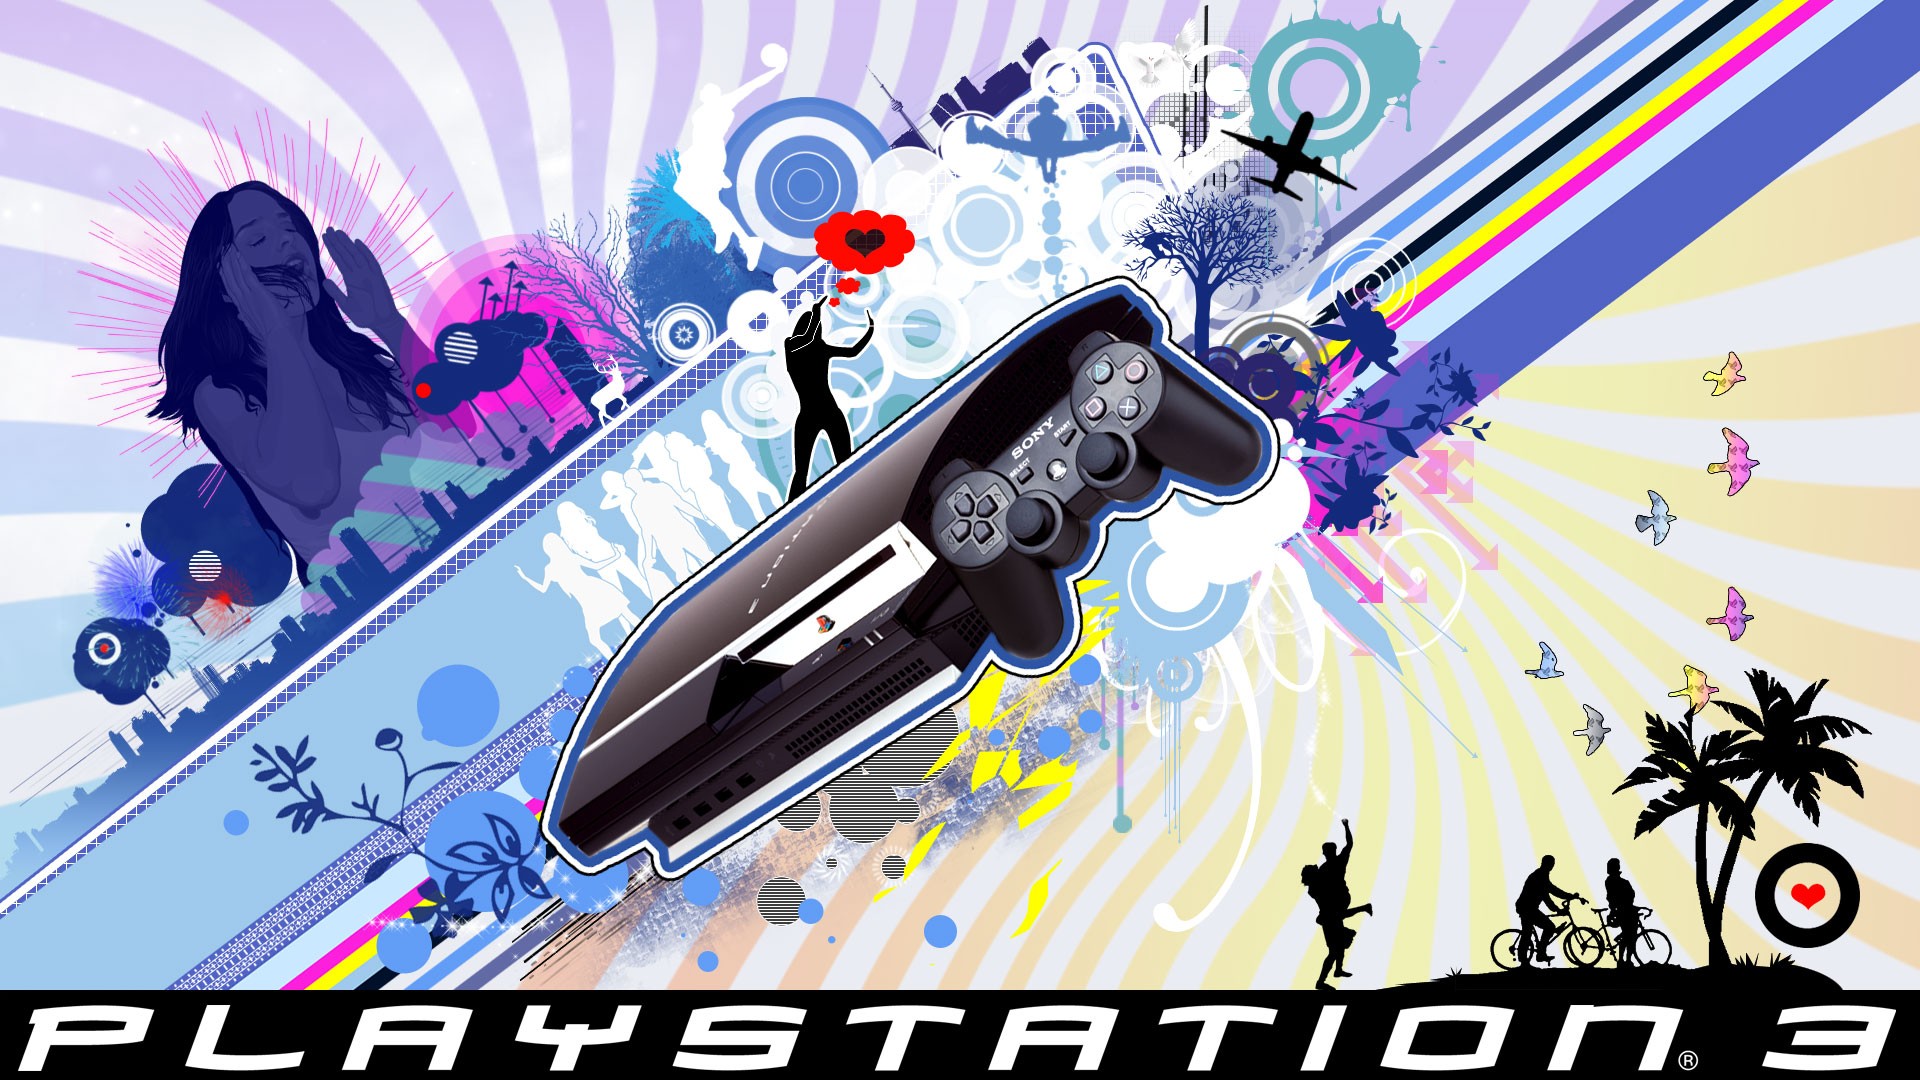 Free Ps3 themes | Wallpapers, Backgrounds, Images, Art Photos.